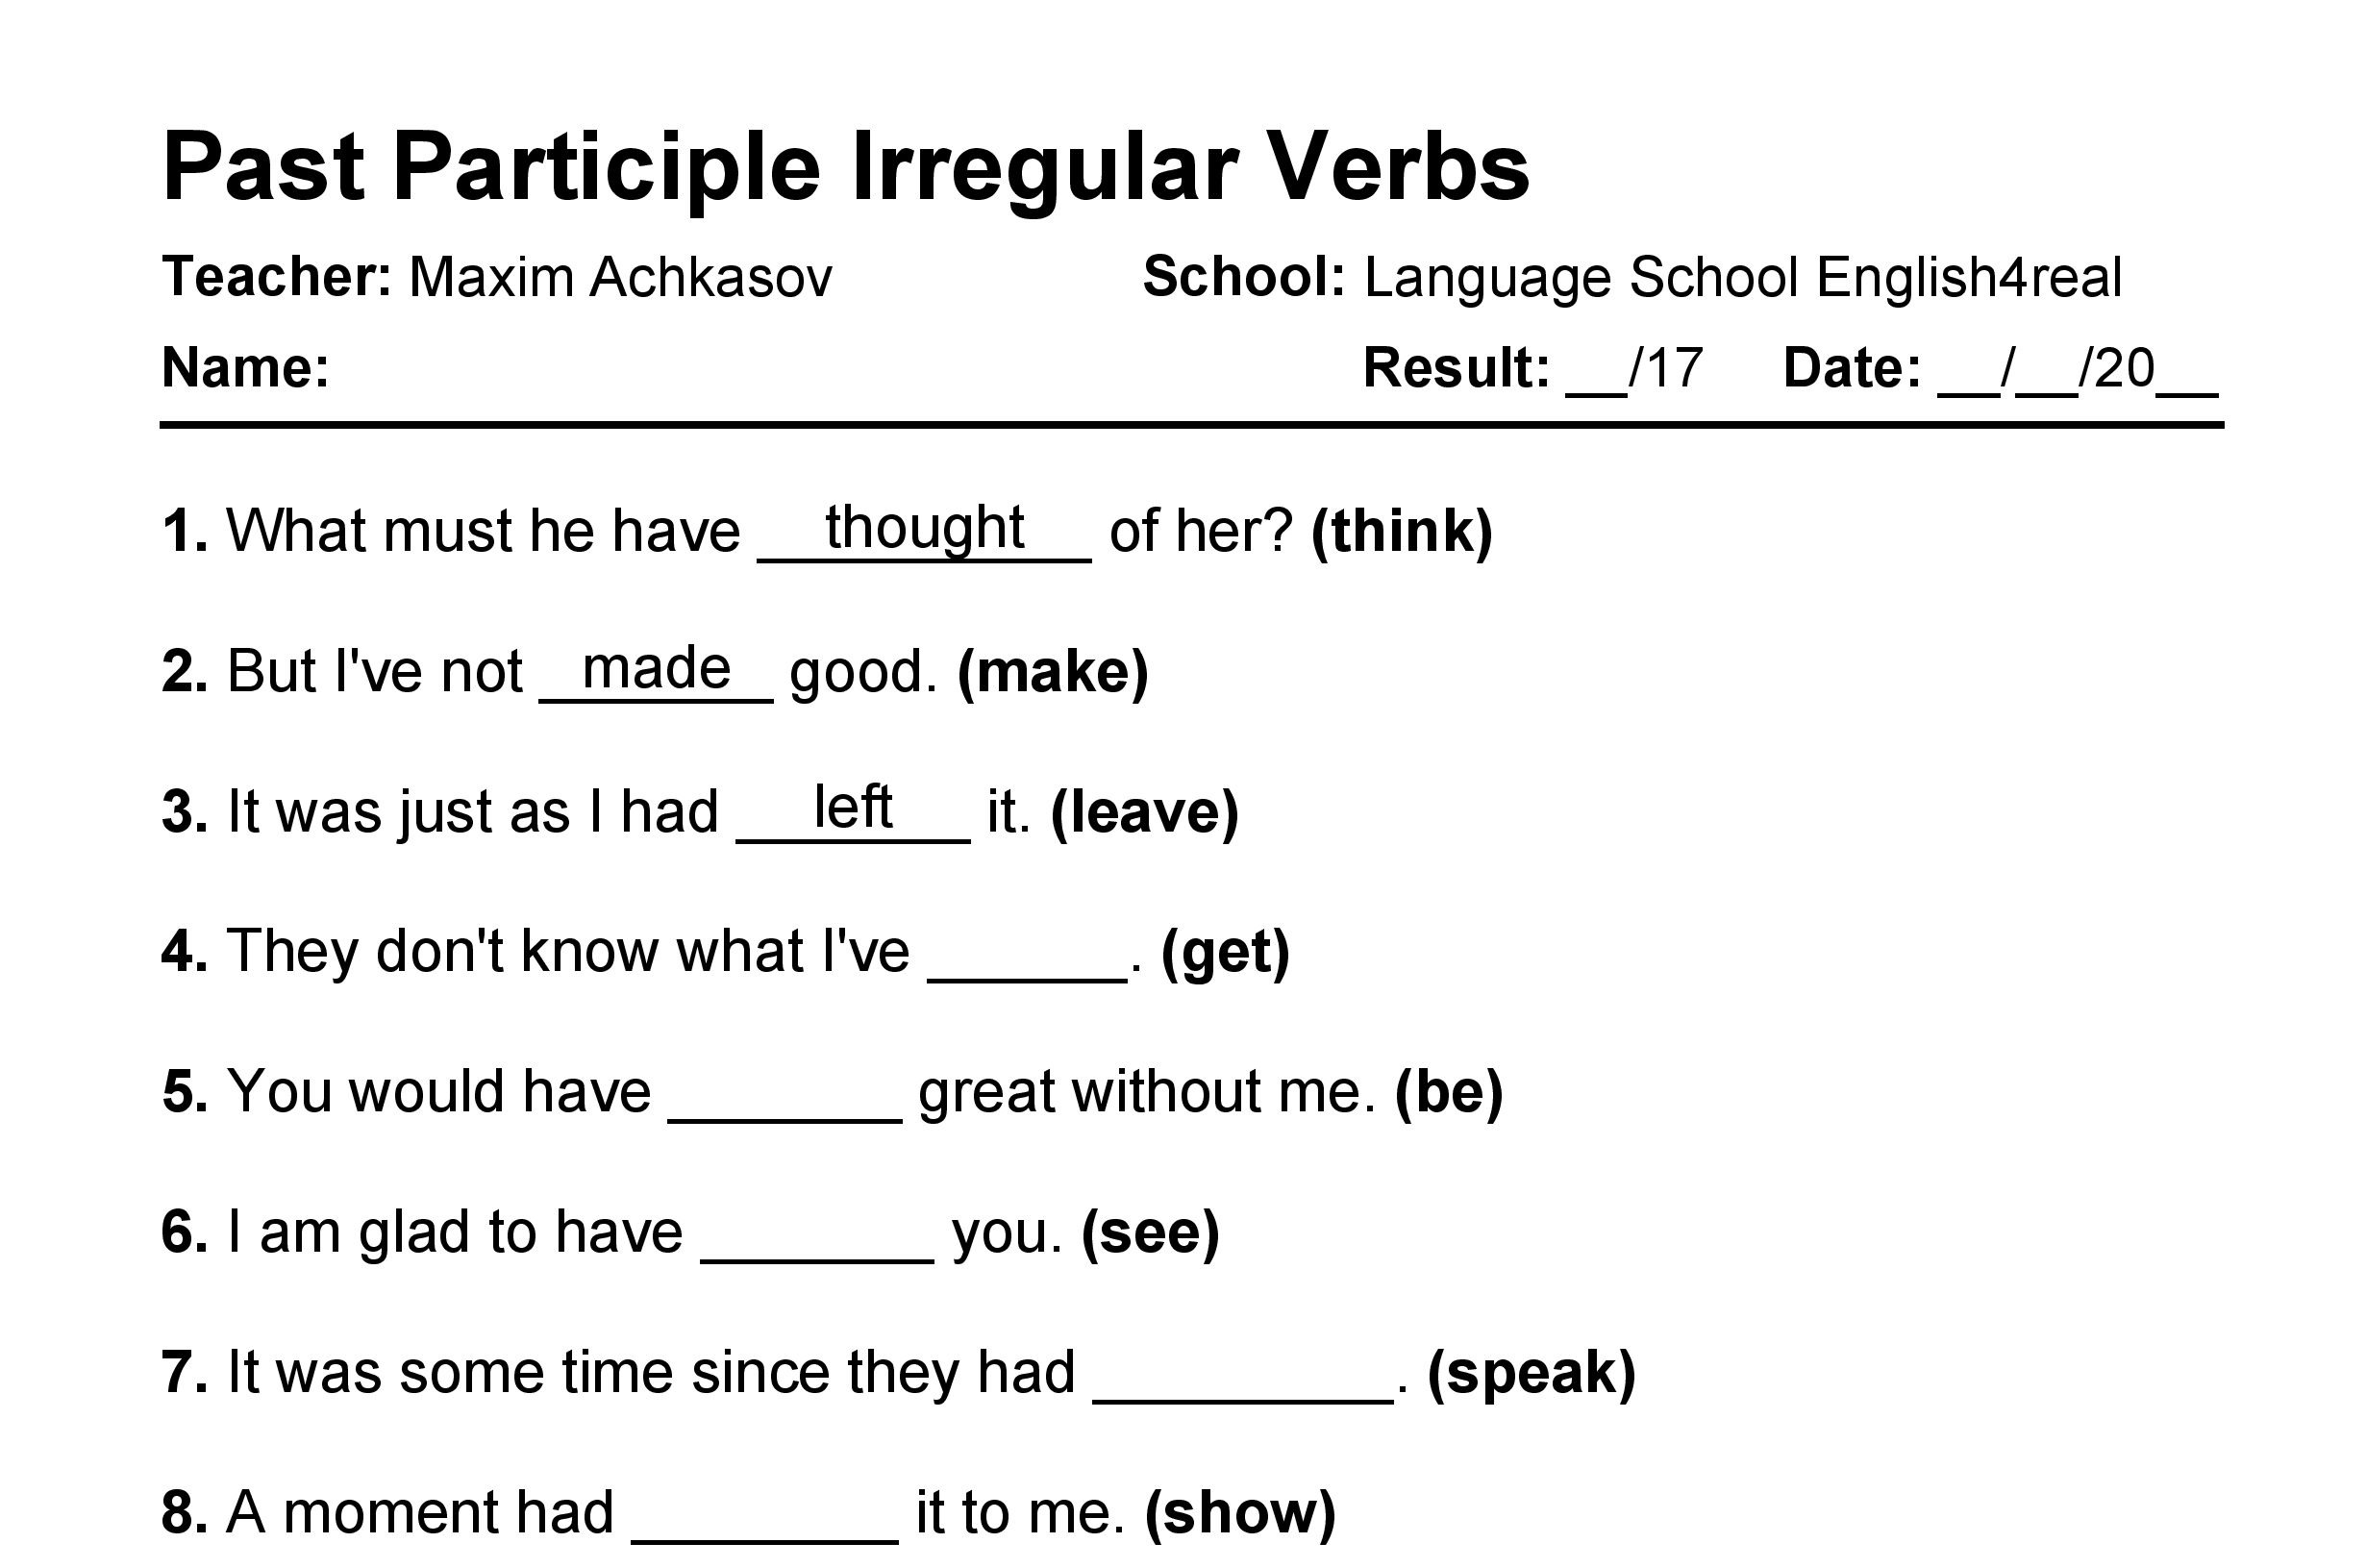 English grammar fill in the blanks exercises with answers in PDF - Past Participle Irregular Verbs